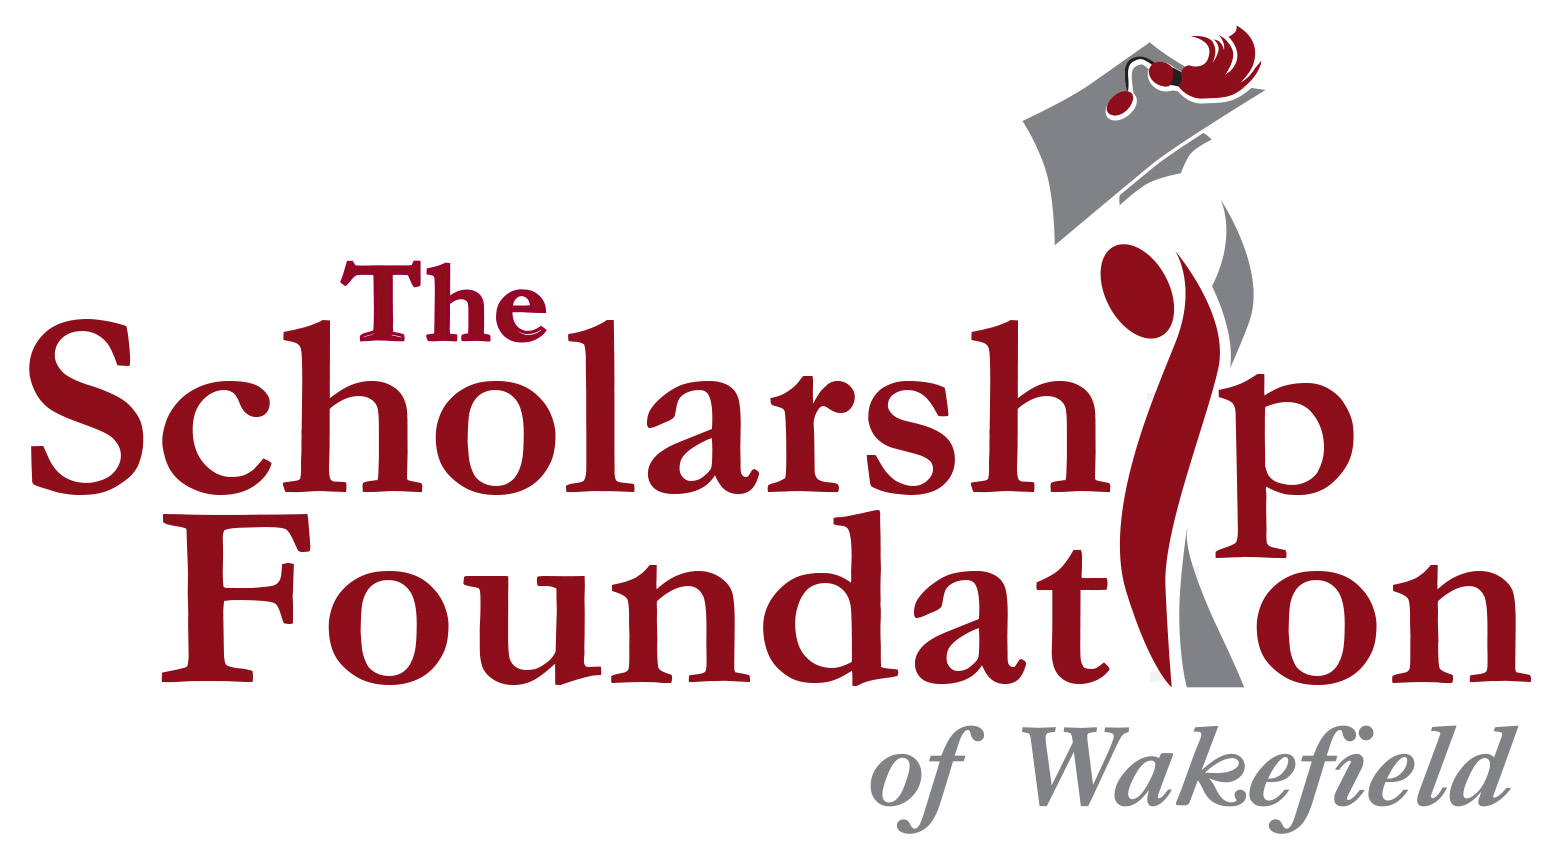 The Scholarship Foundation of Wakefield, Inc